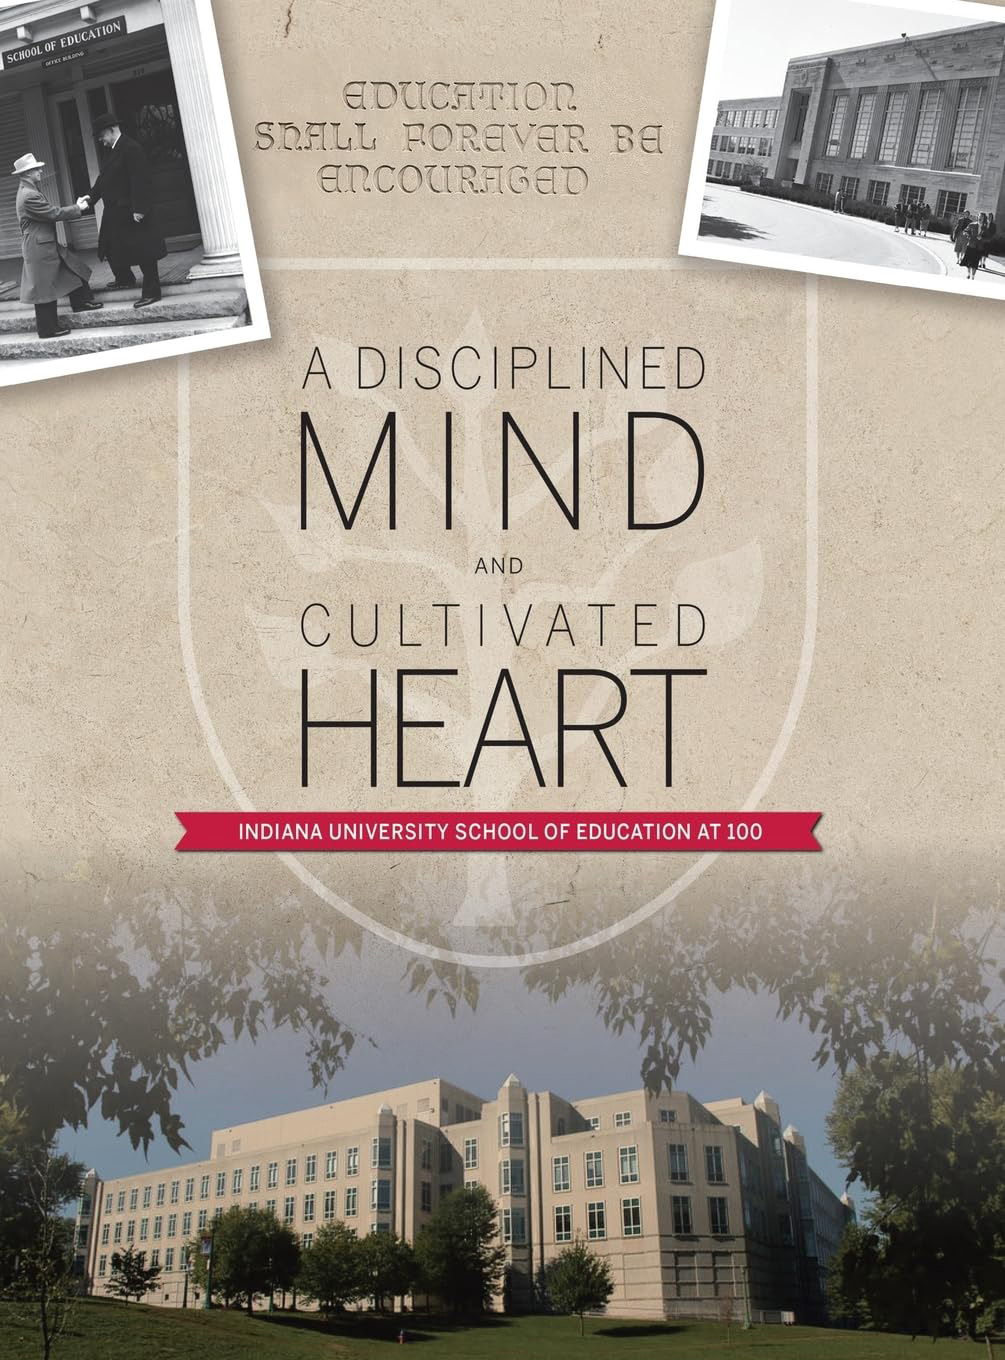 A Disciplined Mind and Cultivated Heart: Indiana University School of Education at 100